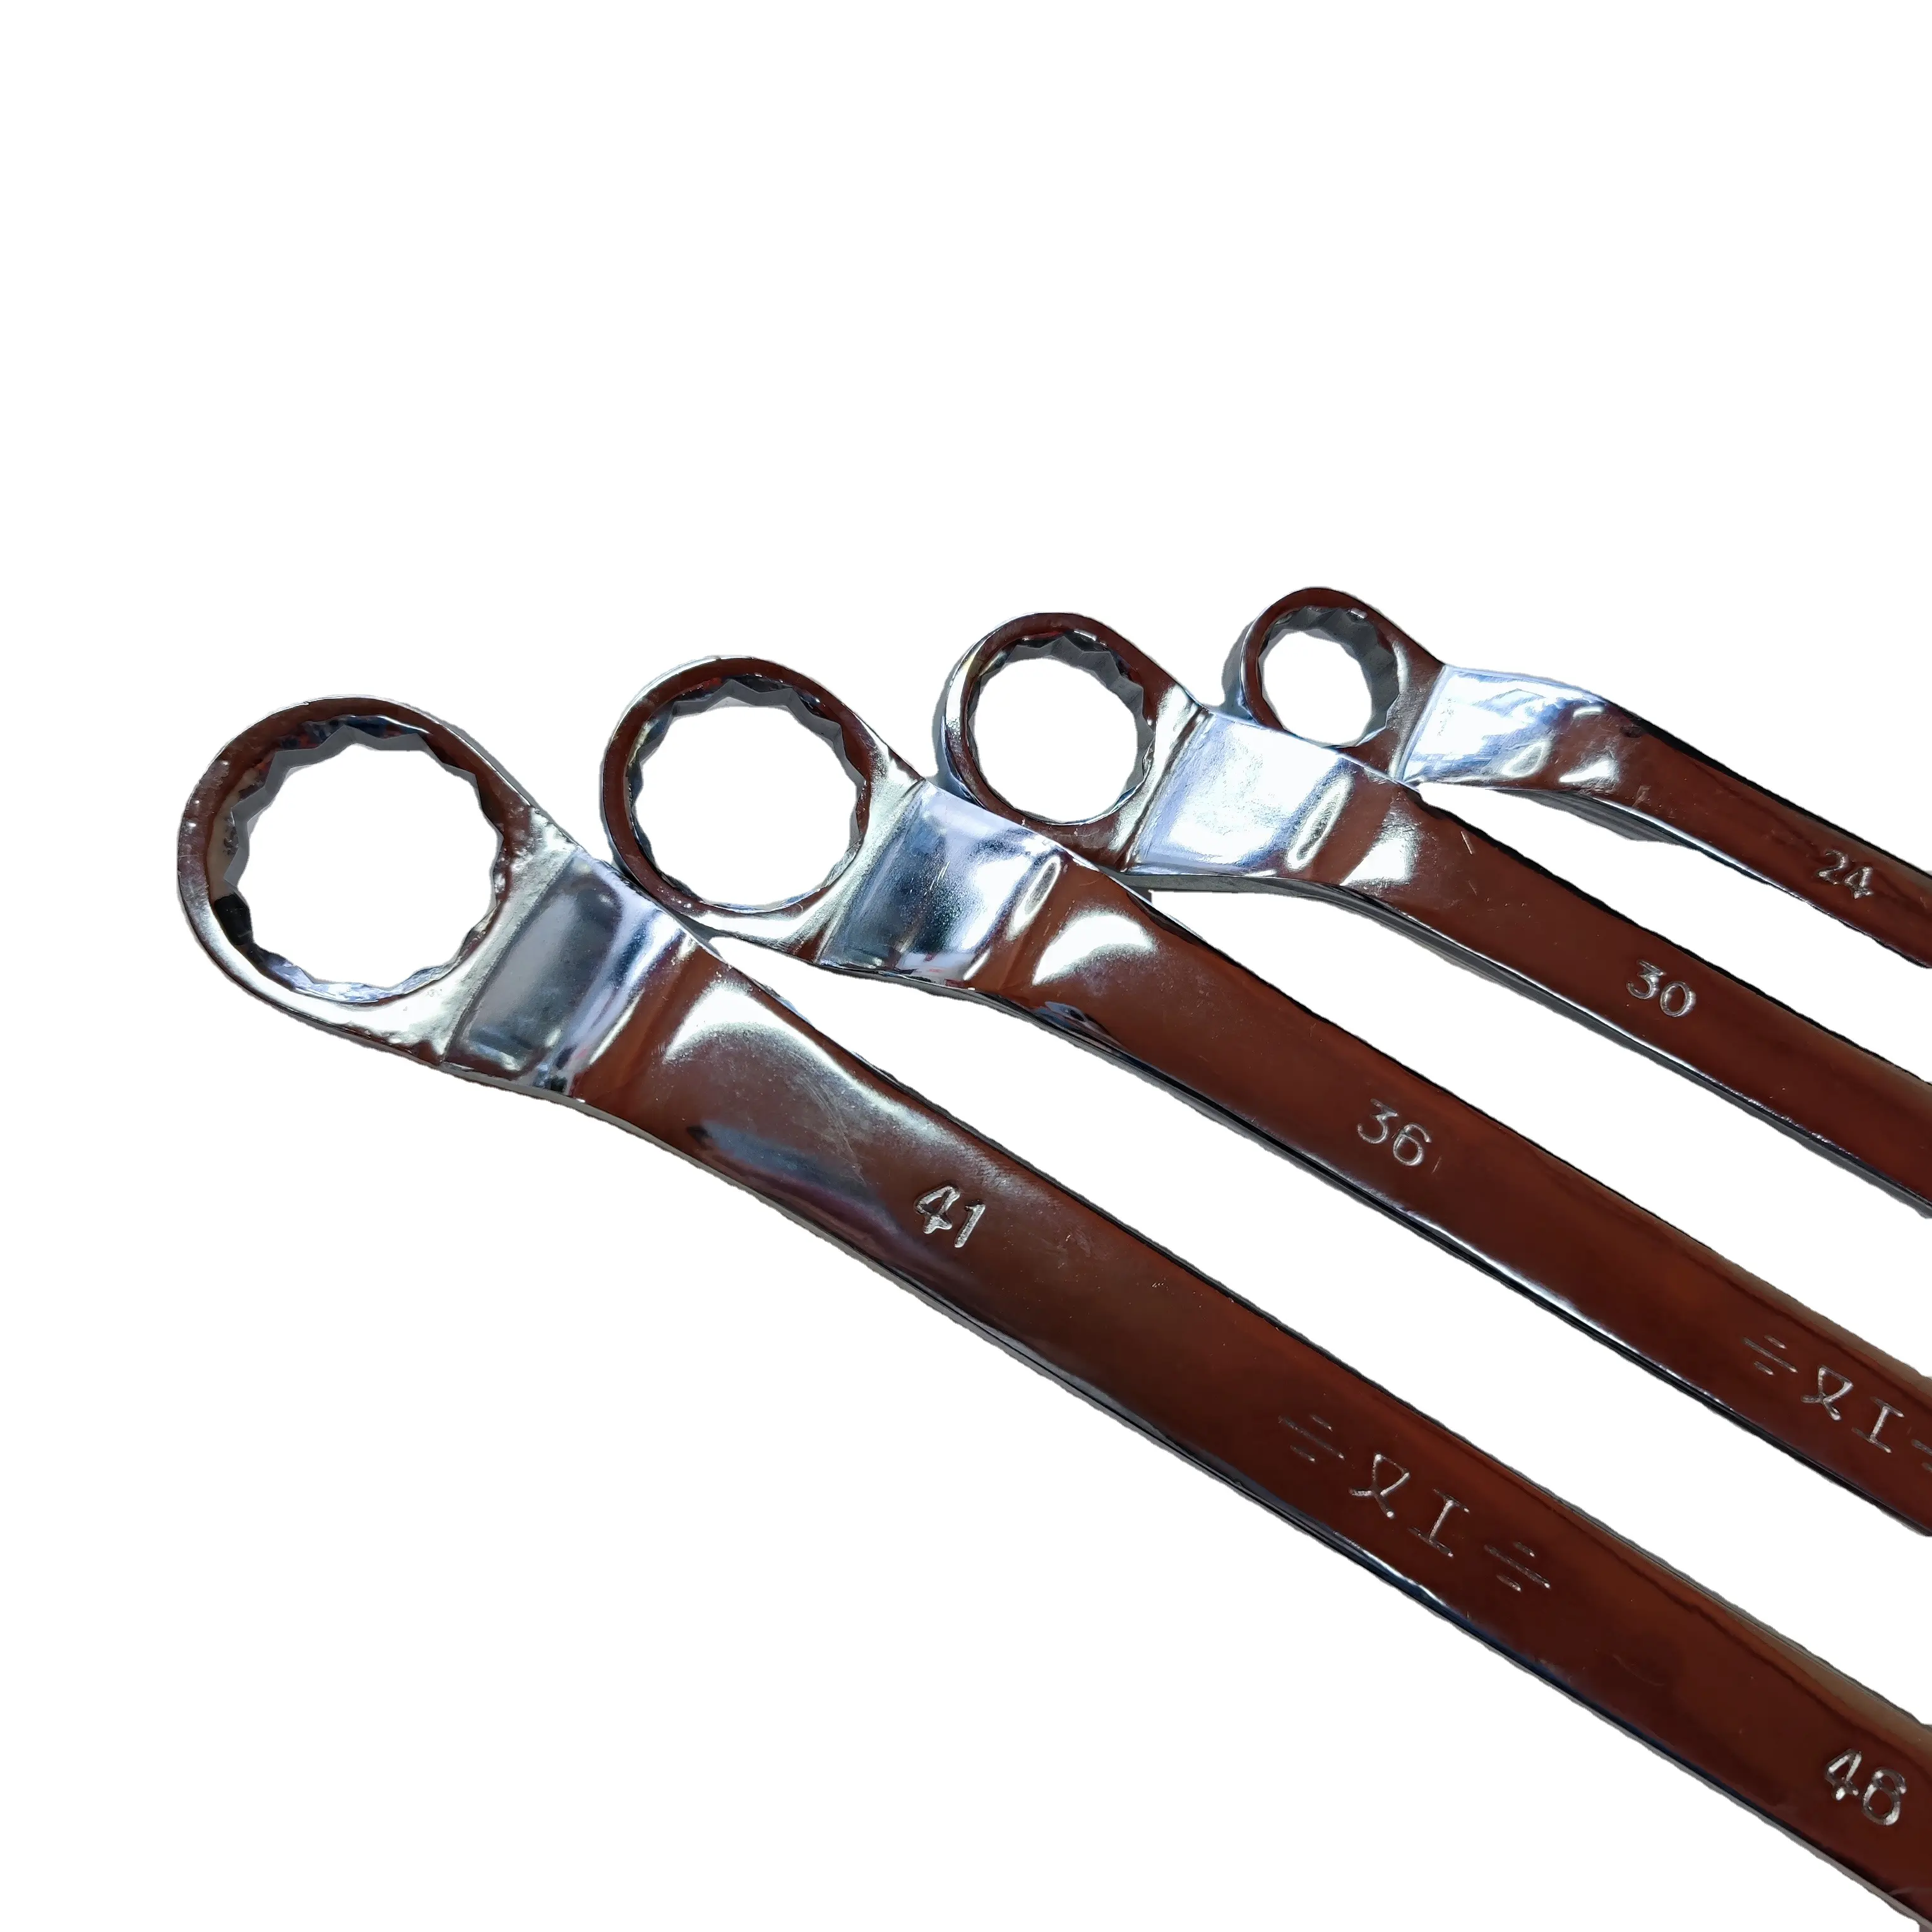 Offset Ring Spanner Carbon Steel Double Spline End Wrench Set Combination Multi-sizes Hand Tool Ring Spanner